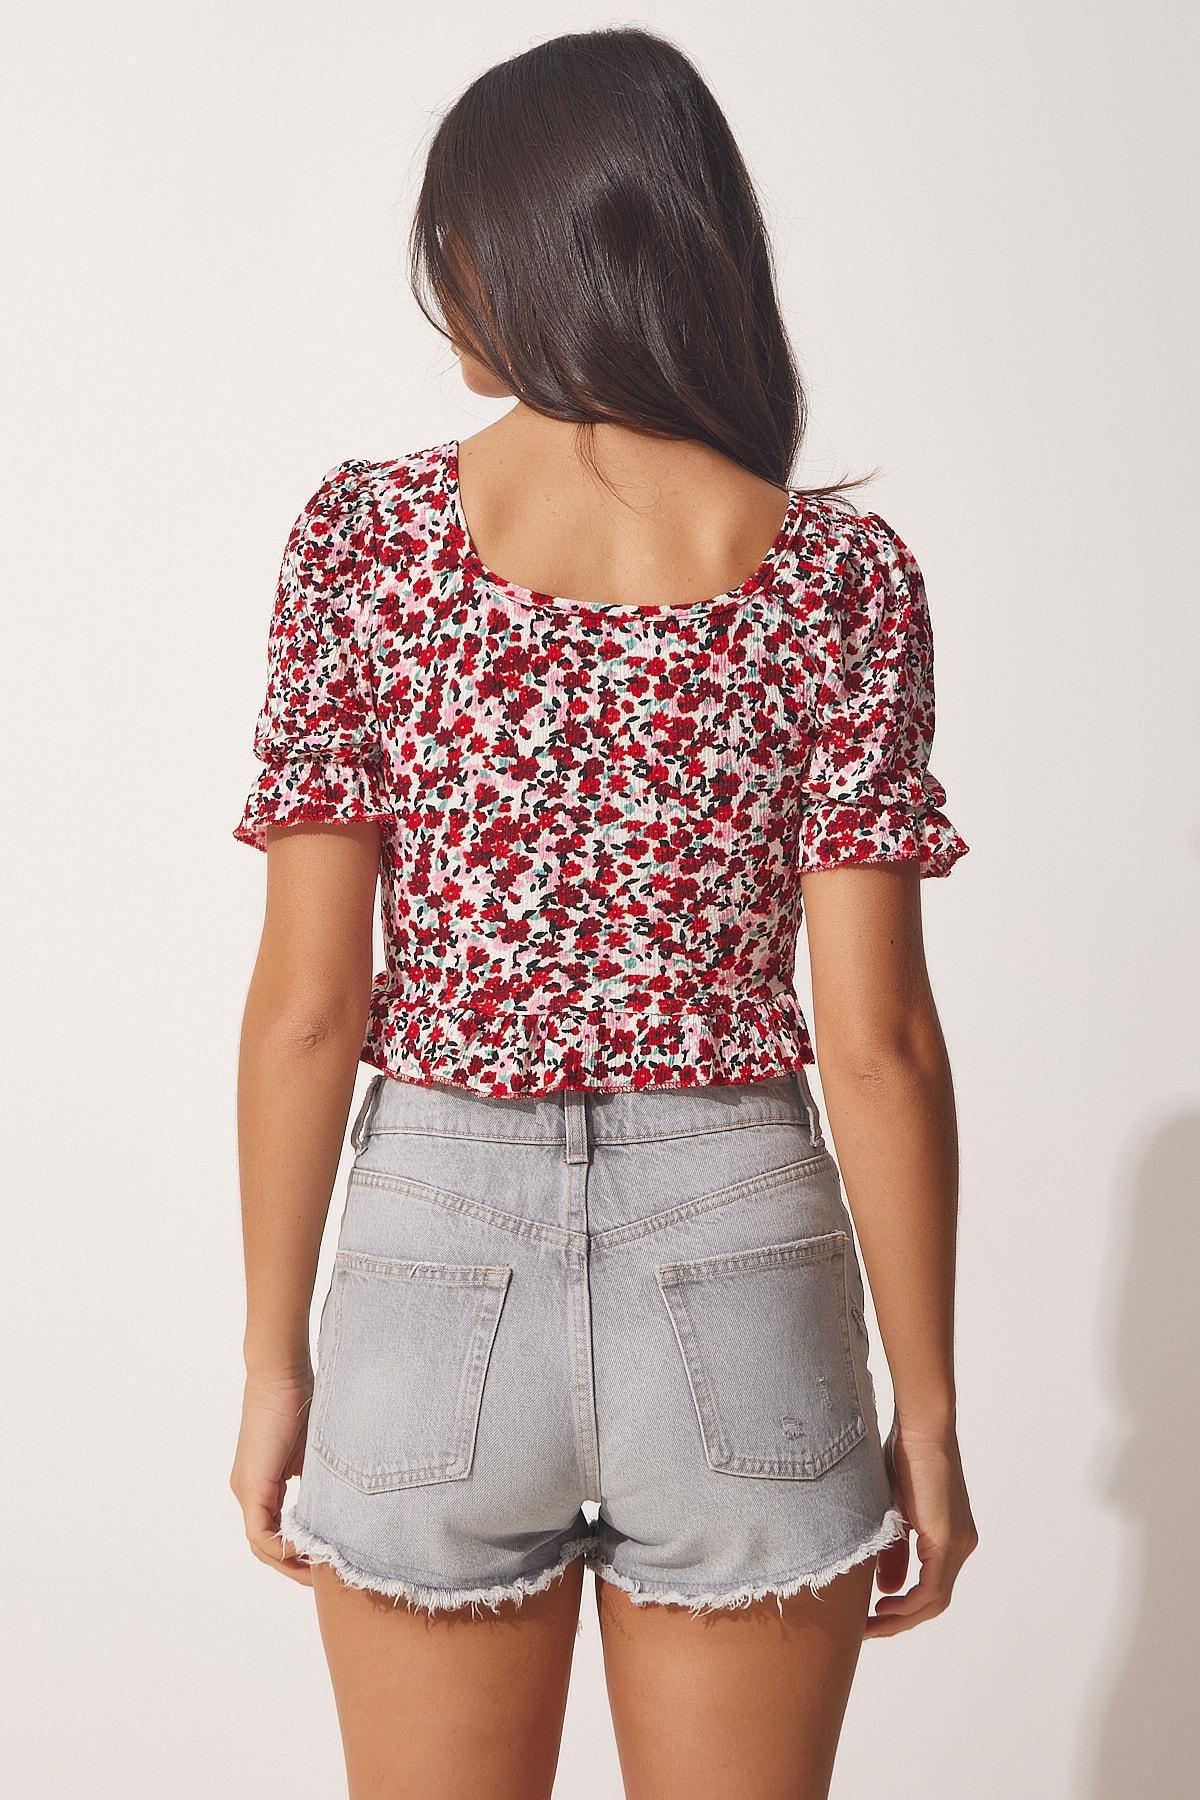 Happiness Istanbul - Red Floral Blouse